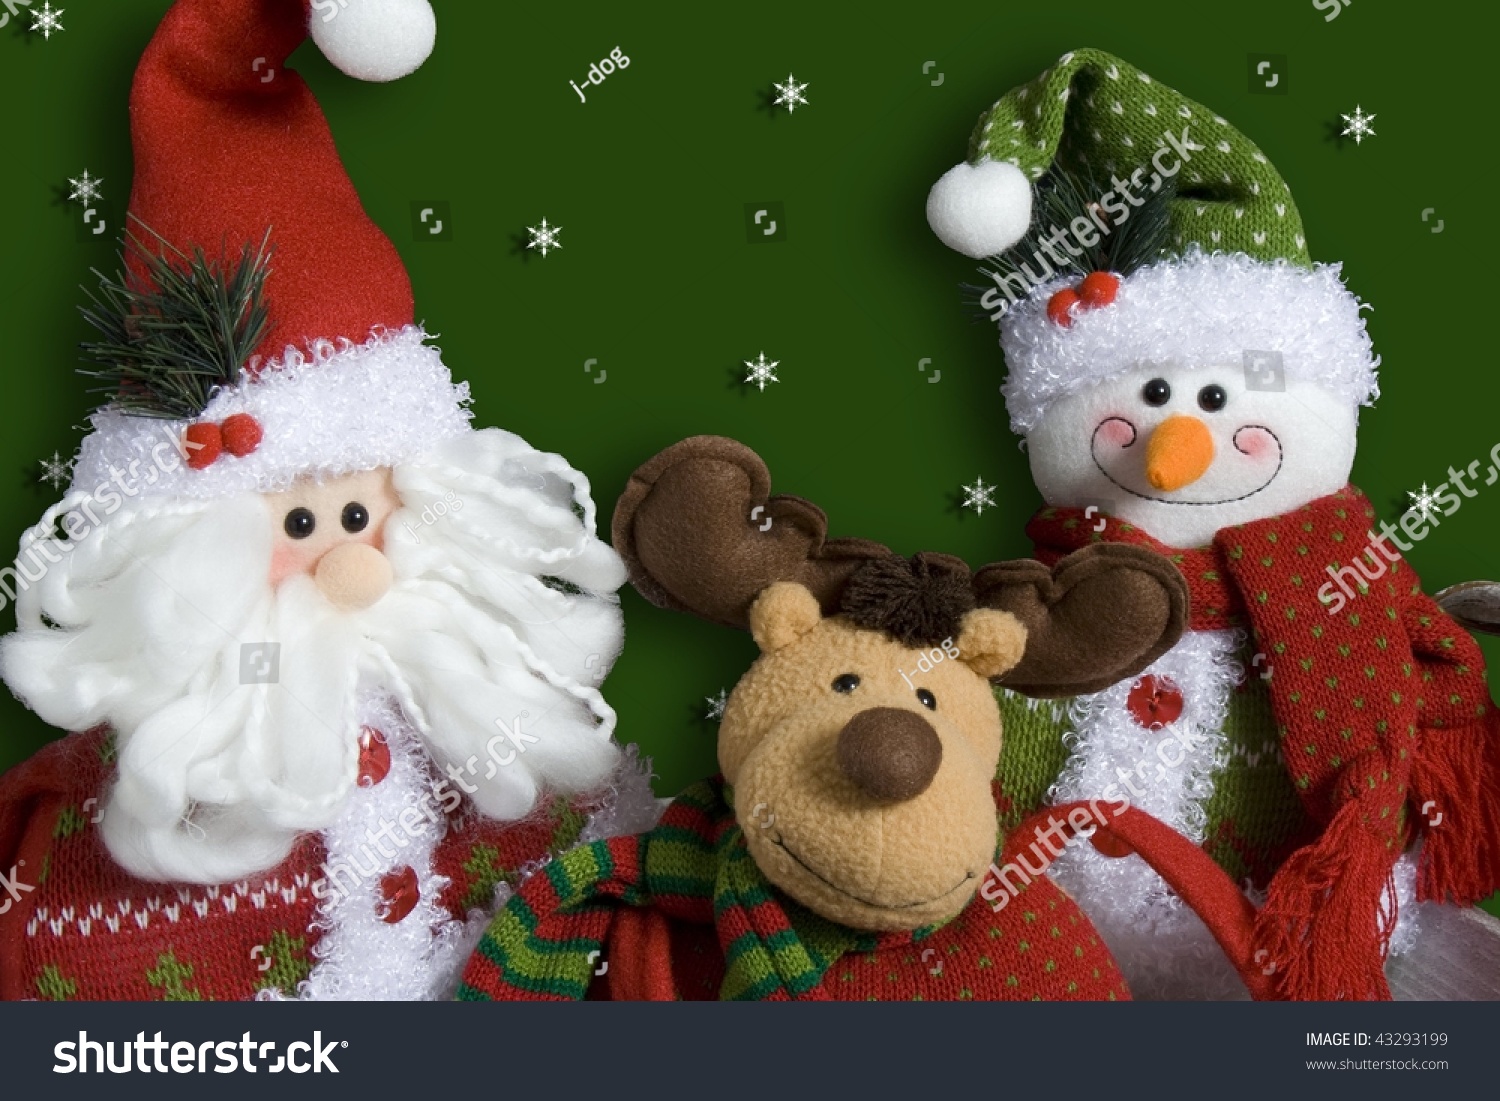 Santa, Rudolph And Frosty On A Green Background. Stock Photo 43293199 ...